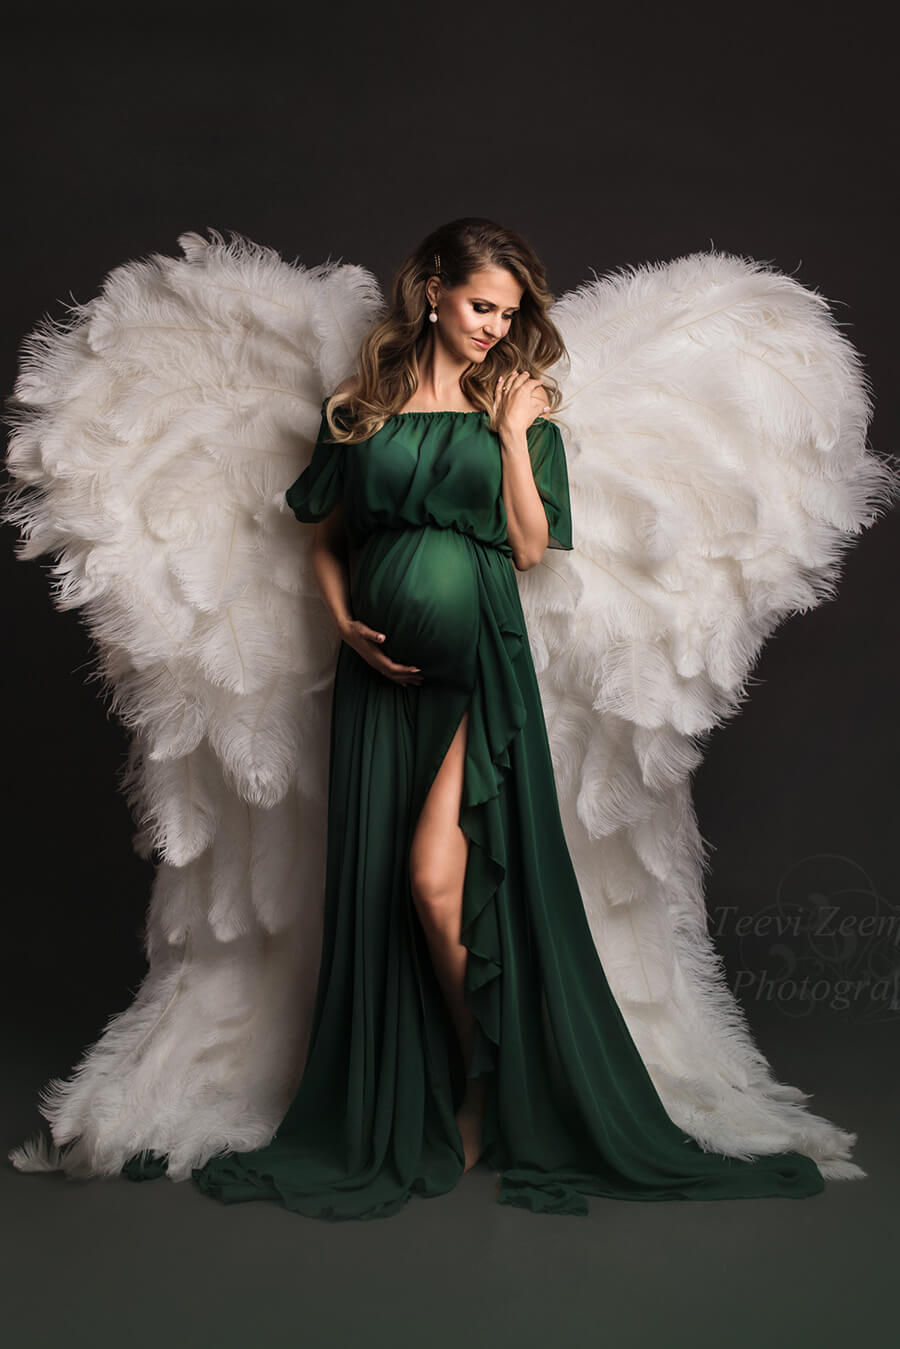 pregnant model poses in a studio wearing a dark green chiffon dress with ruffle details and a side split. she is wearing a fake big wing on her back in white color. 